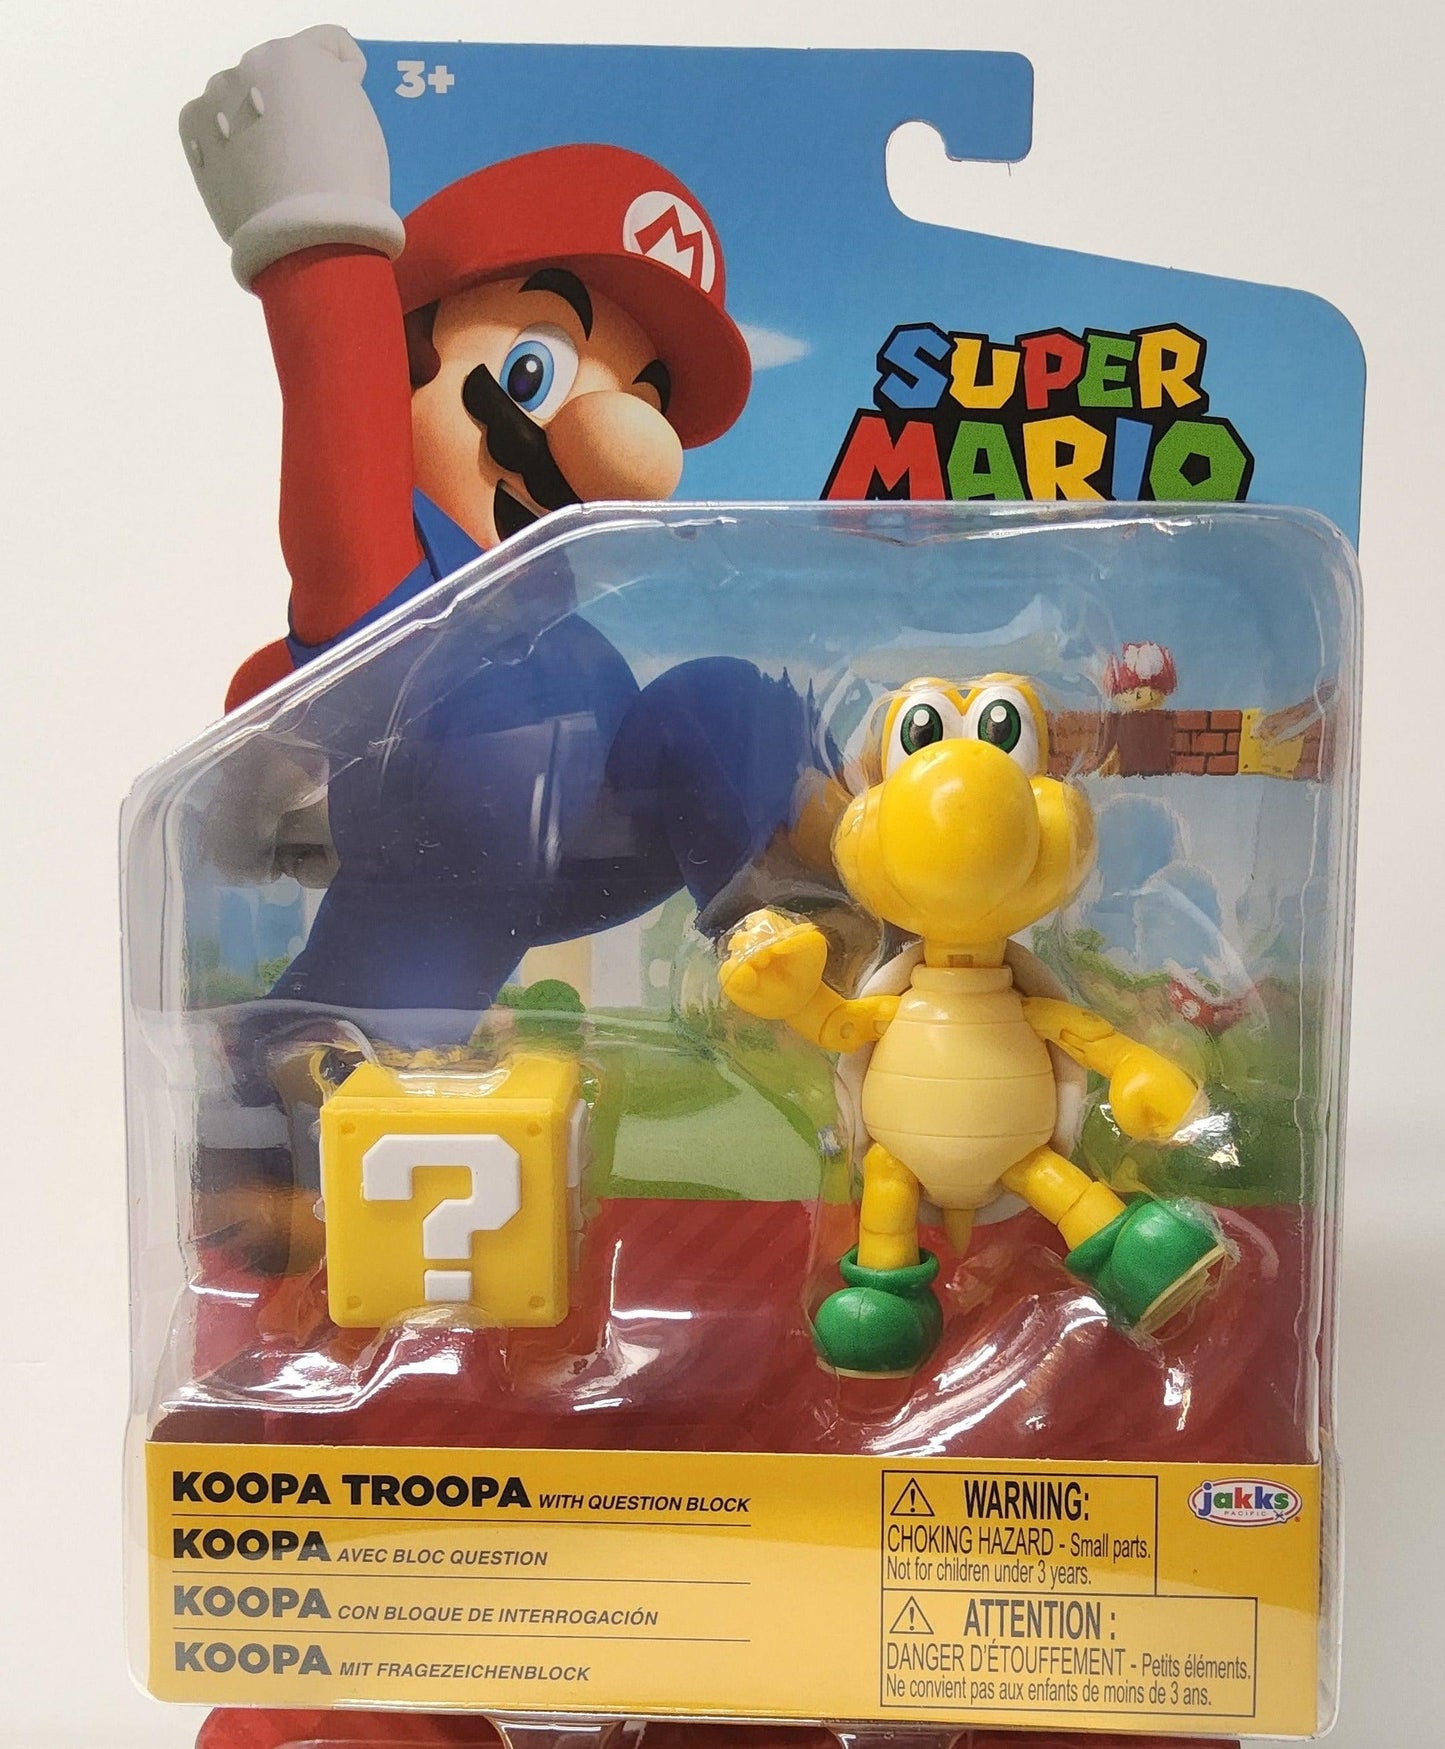 Koopa Troopa Super Mario Brothers 4" Action Figure - Logan's Toy Chest